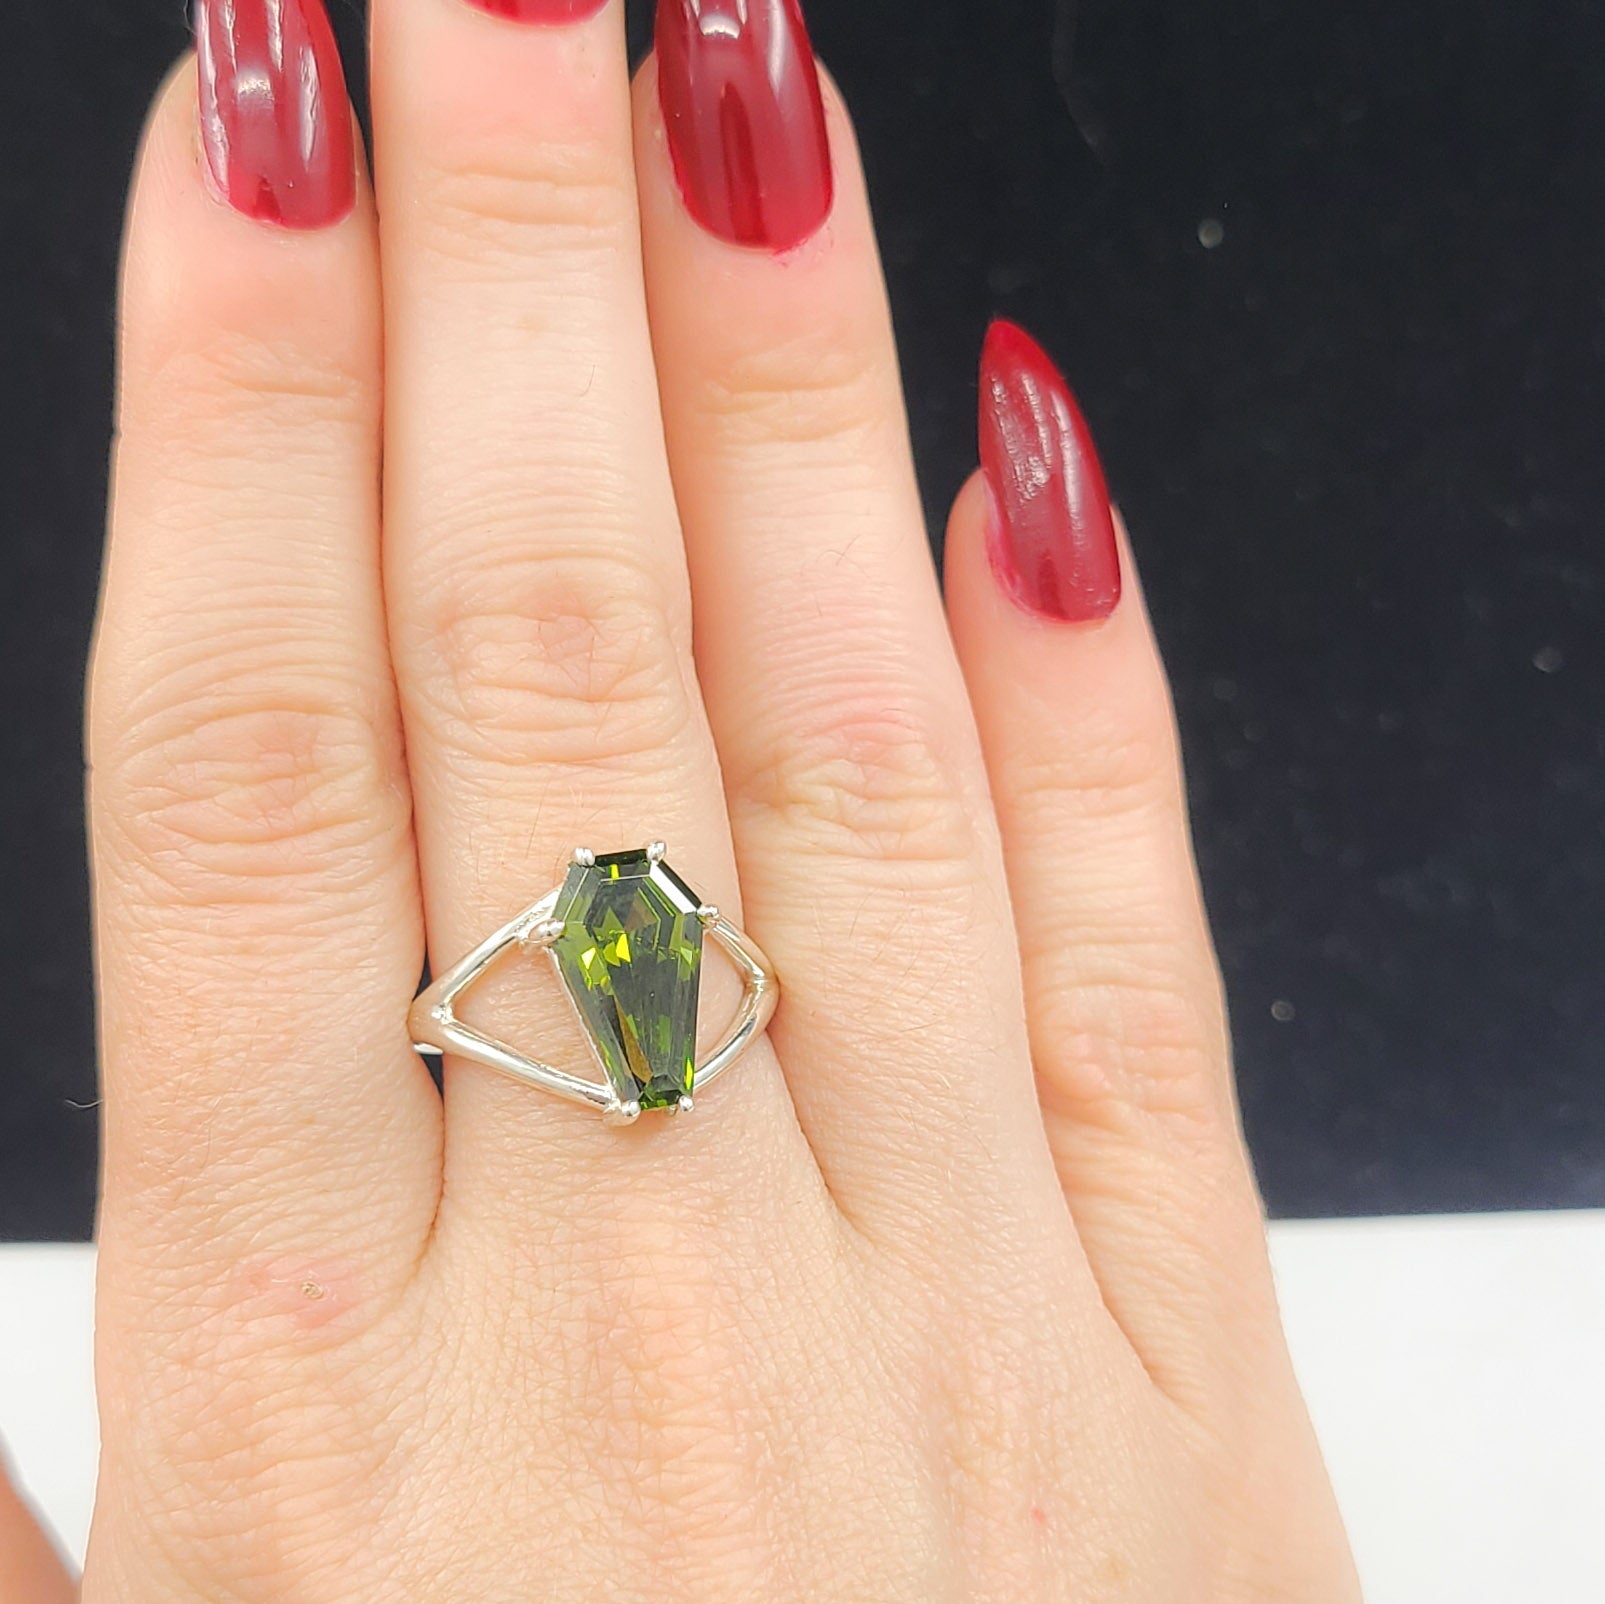 Big Slime Green Coffin Ring